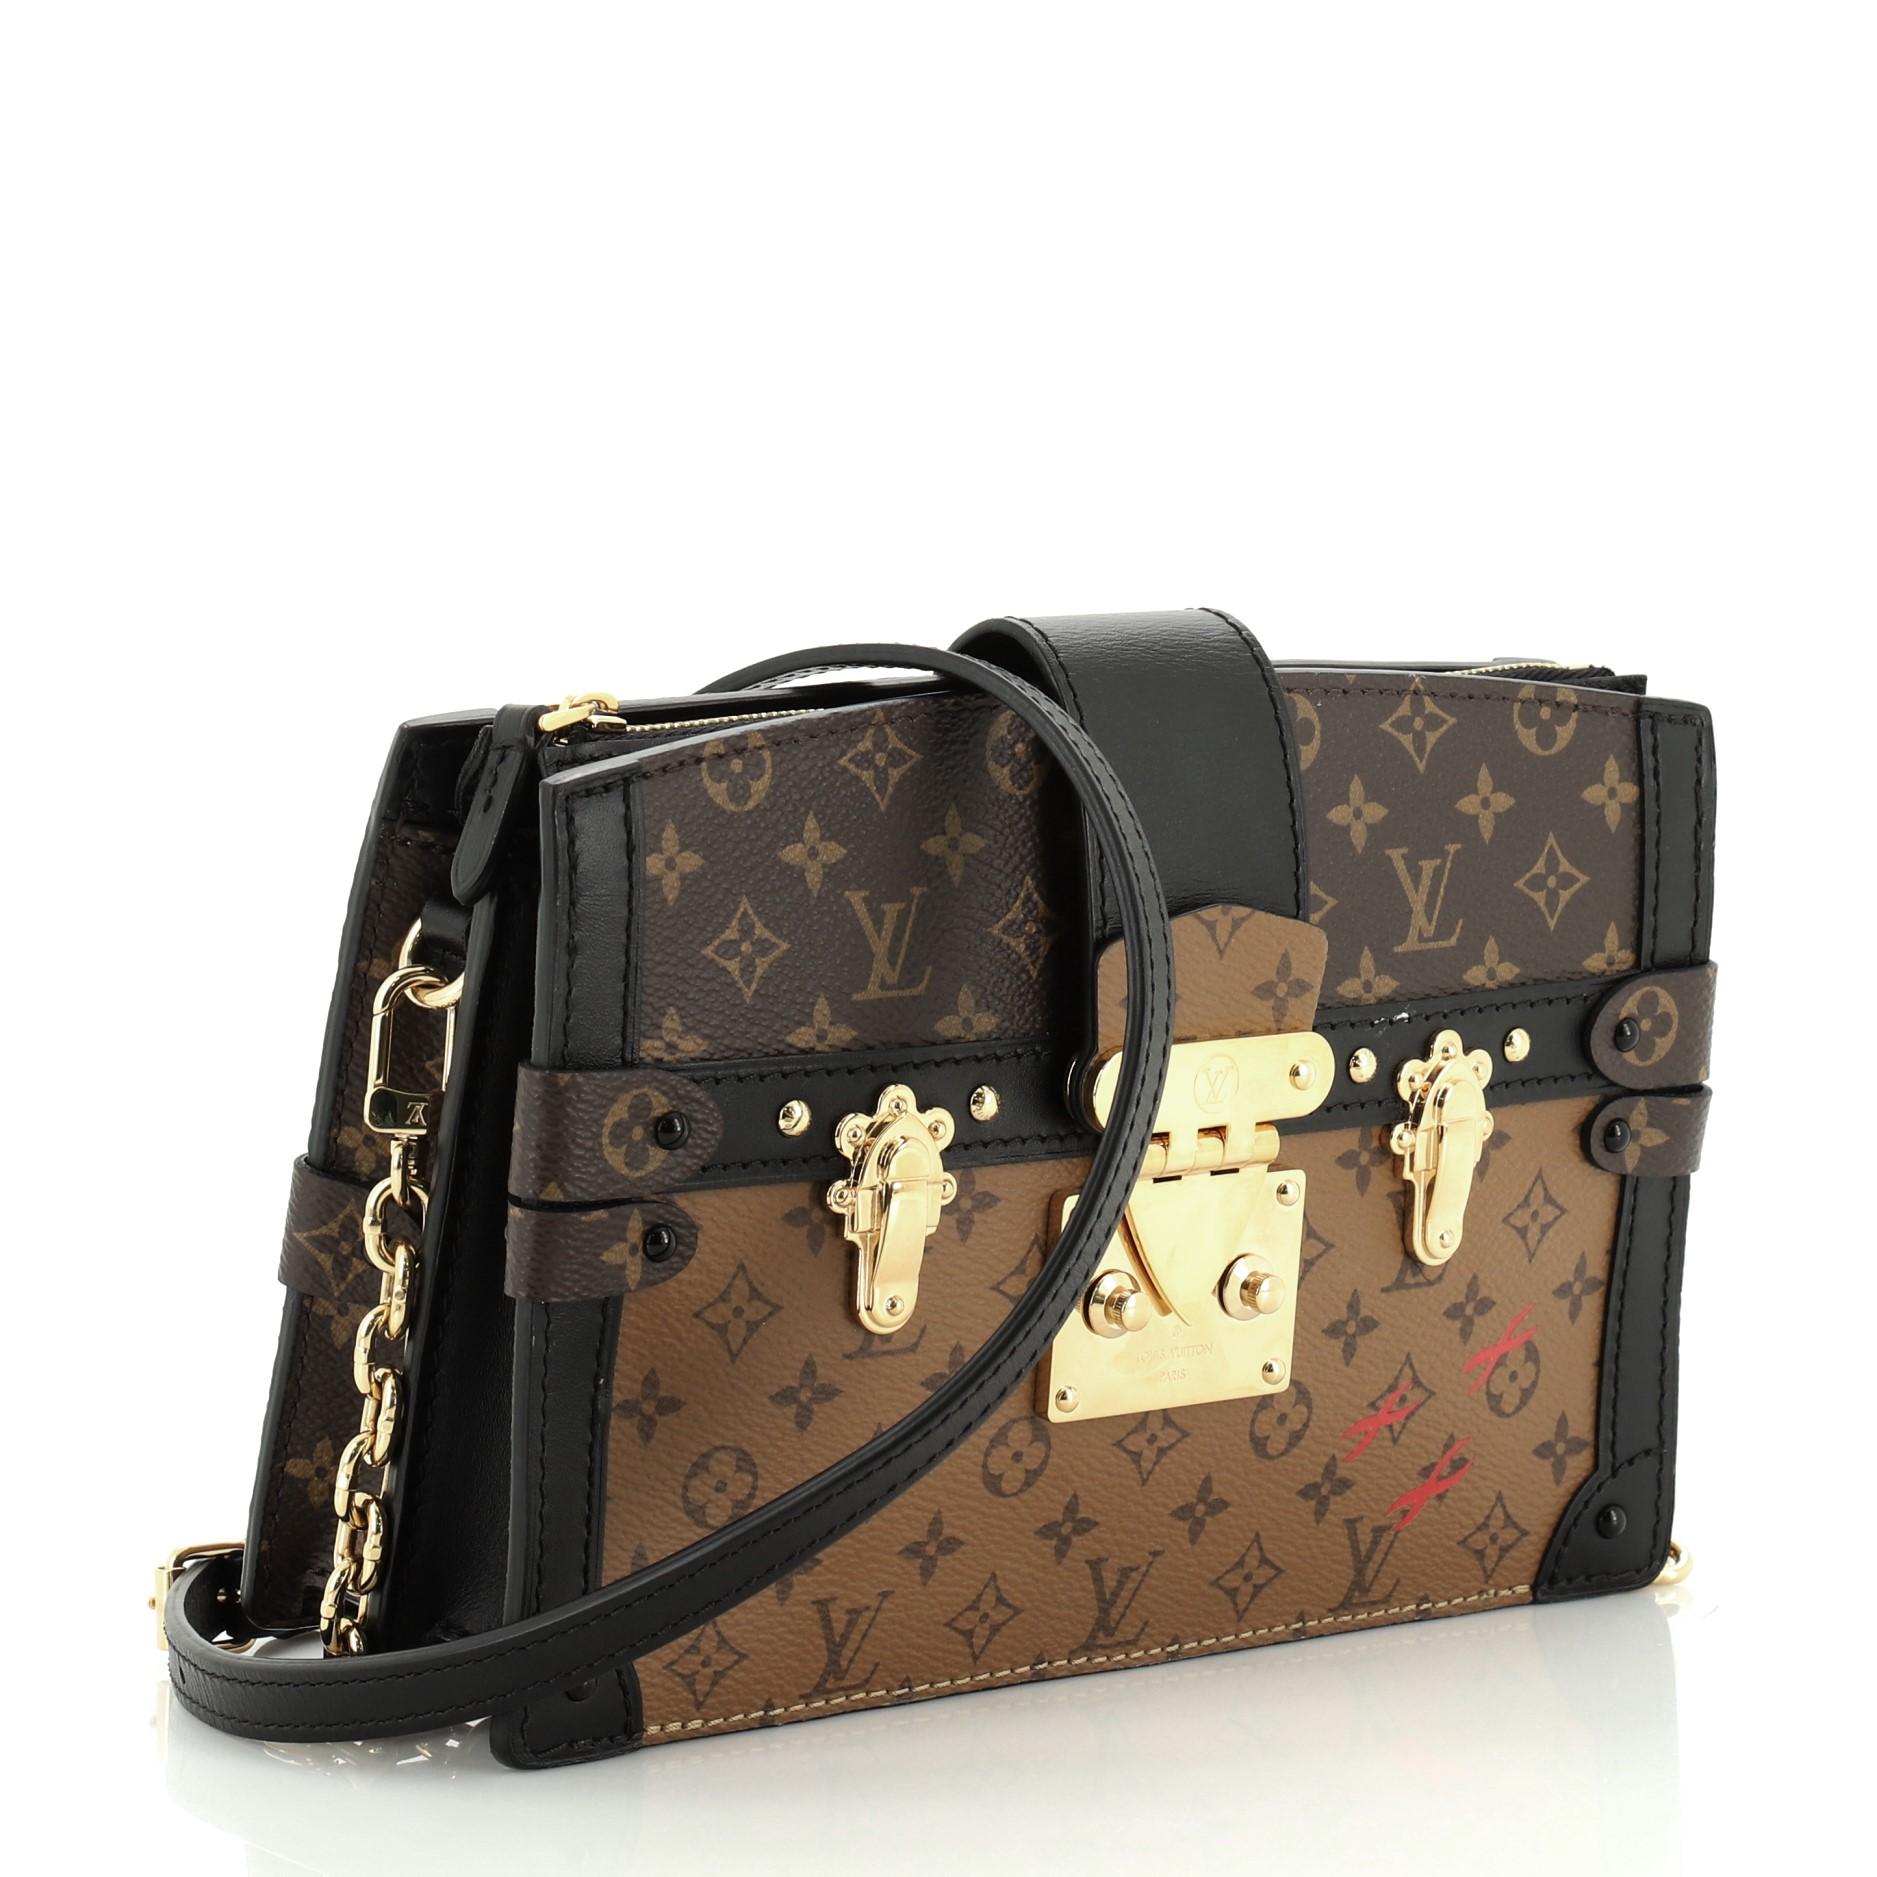 This Louis Vuitton Trunk Clutch Reverse Monogram Canvas is a classic bag with monogram pattern introduced in 1896 inspired by Japanese and oriental designs from the Victoria Era. Crafted in brown reverse monogram coated canvas, it features